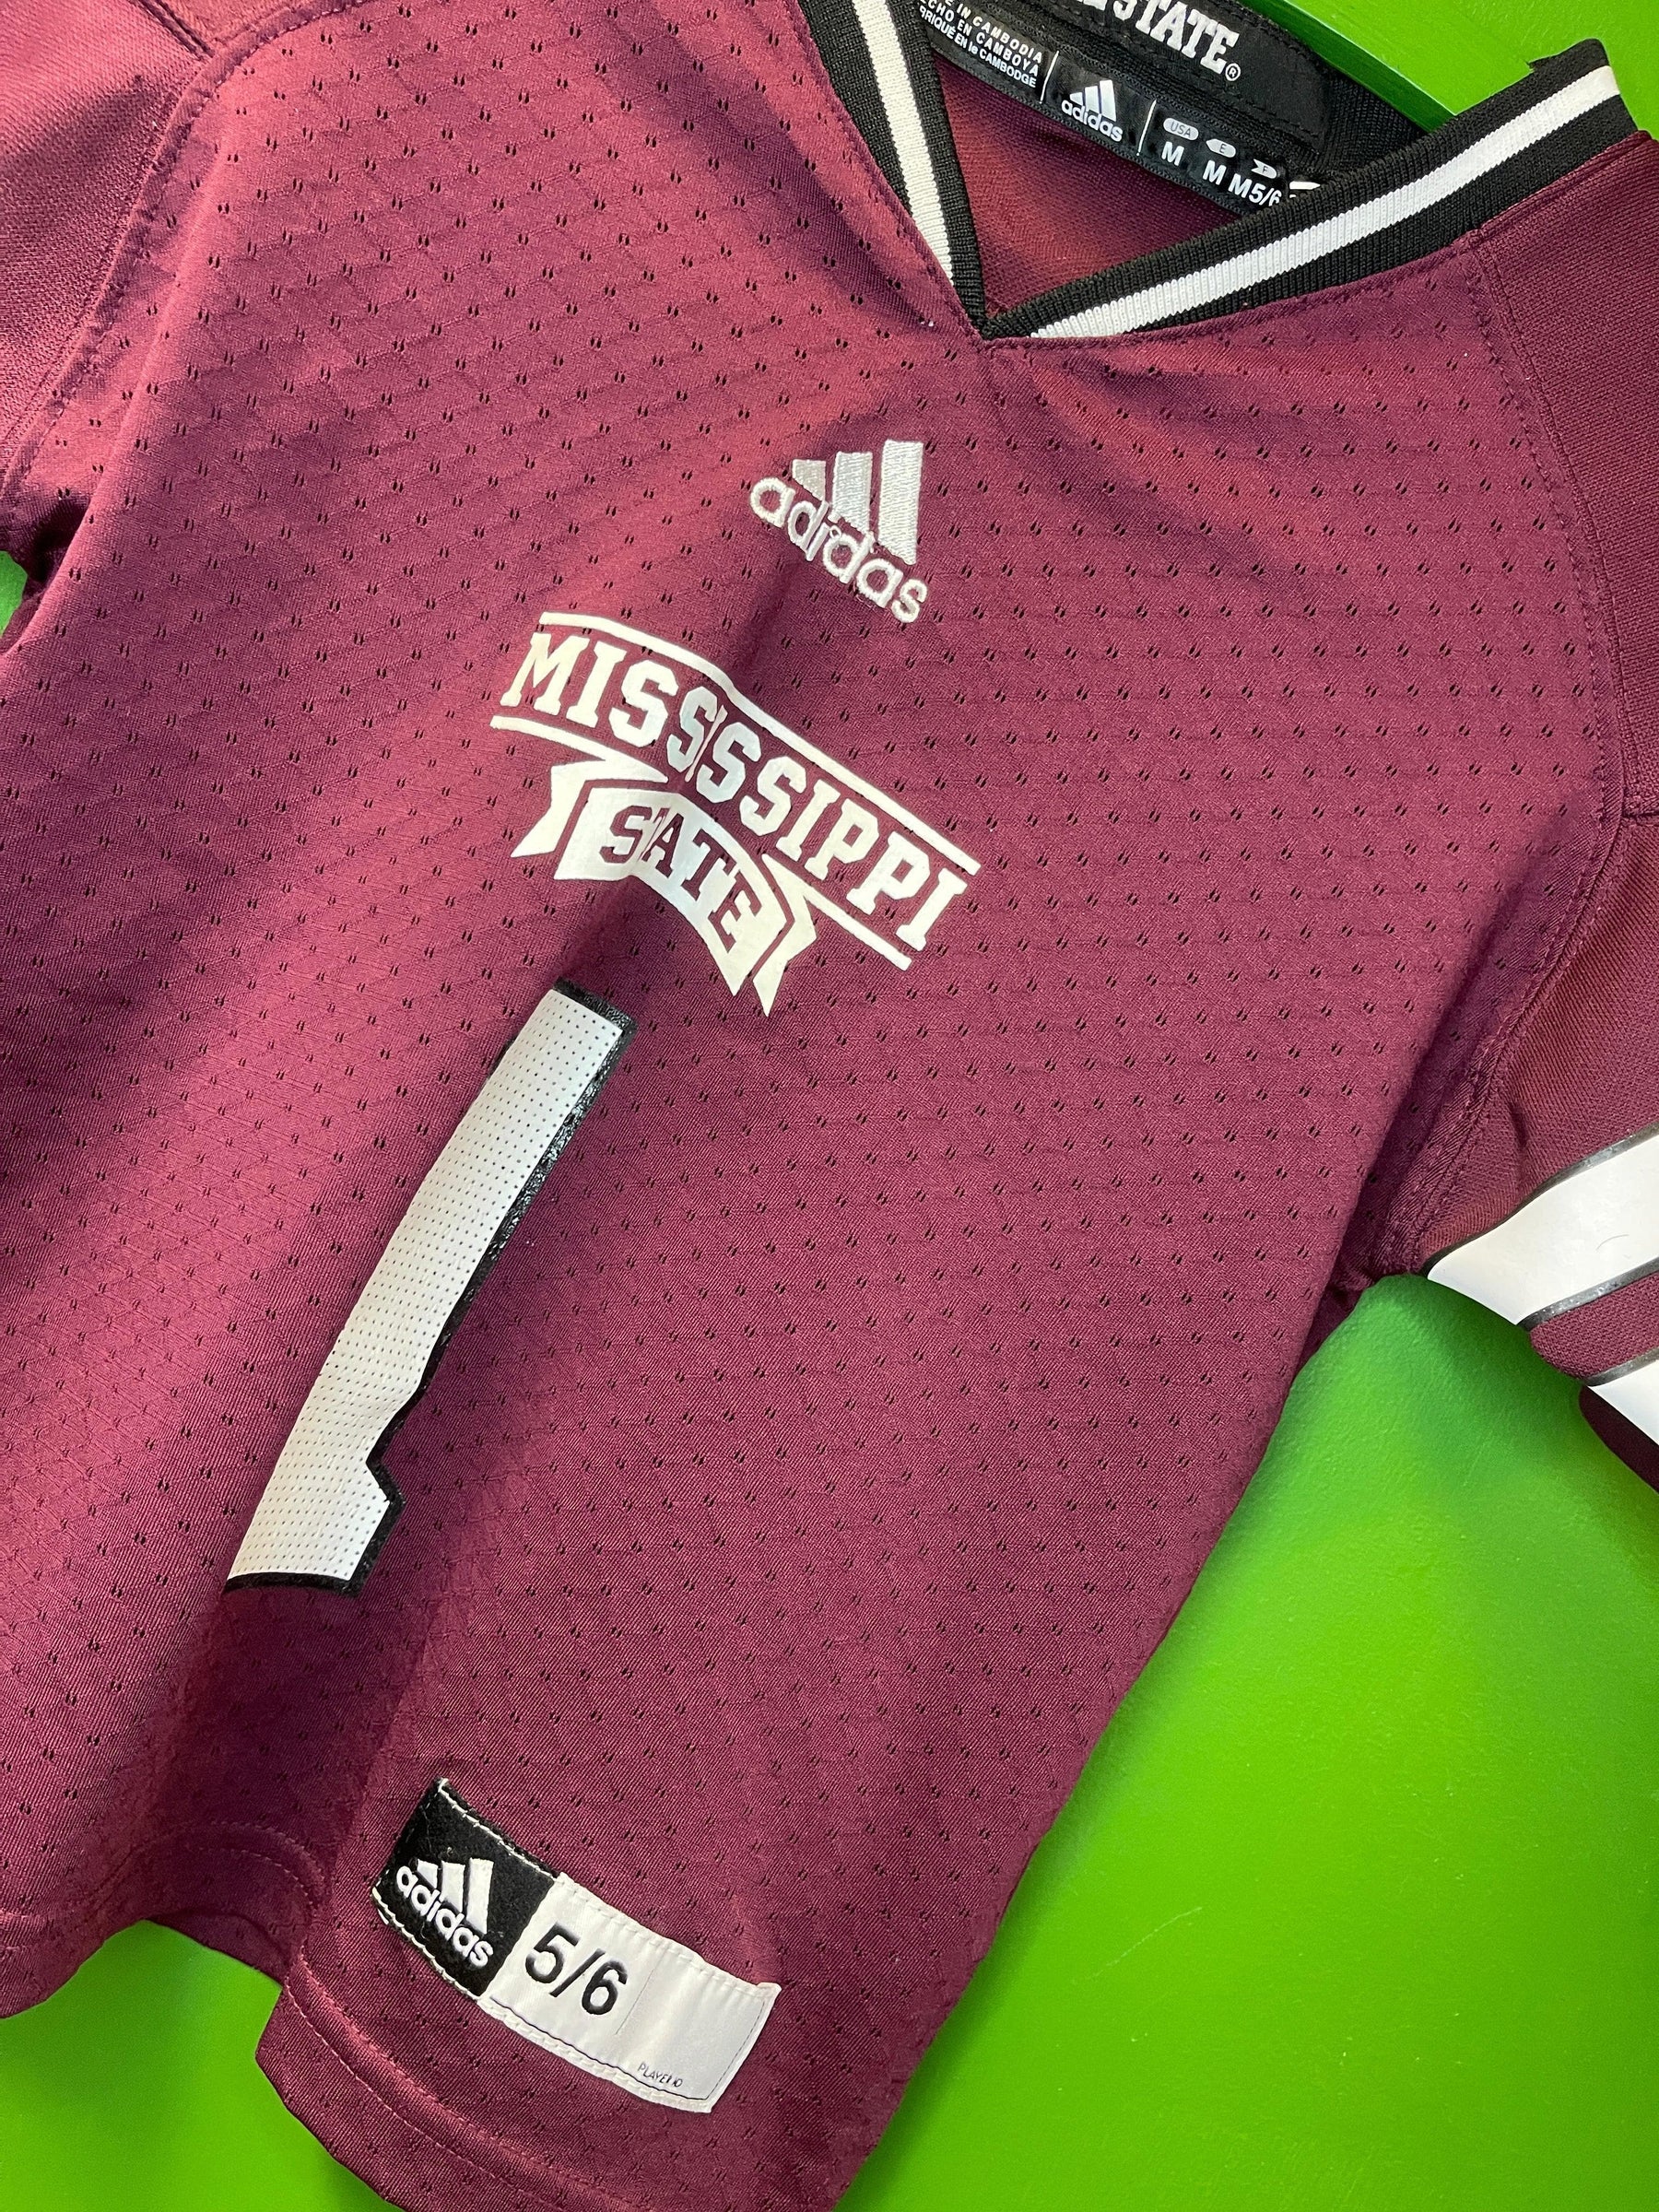 NCAA Mississippi State Bulldogs #1 Jersey Youth X-Small/Small 5-6